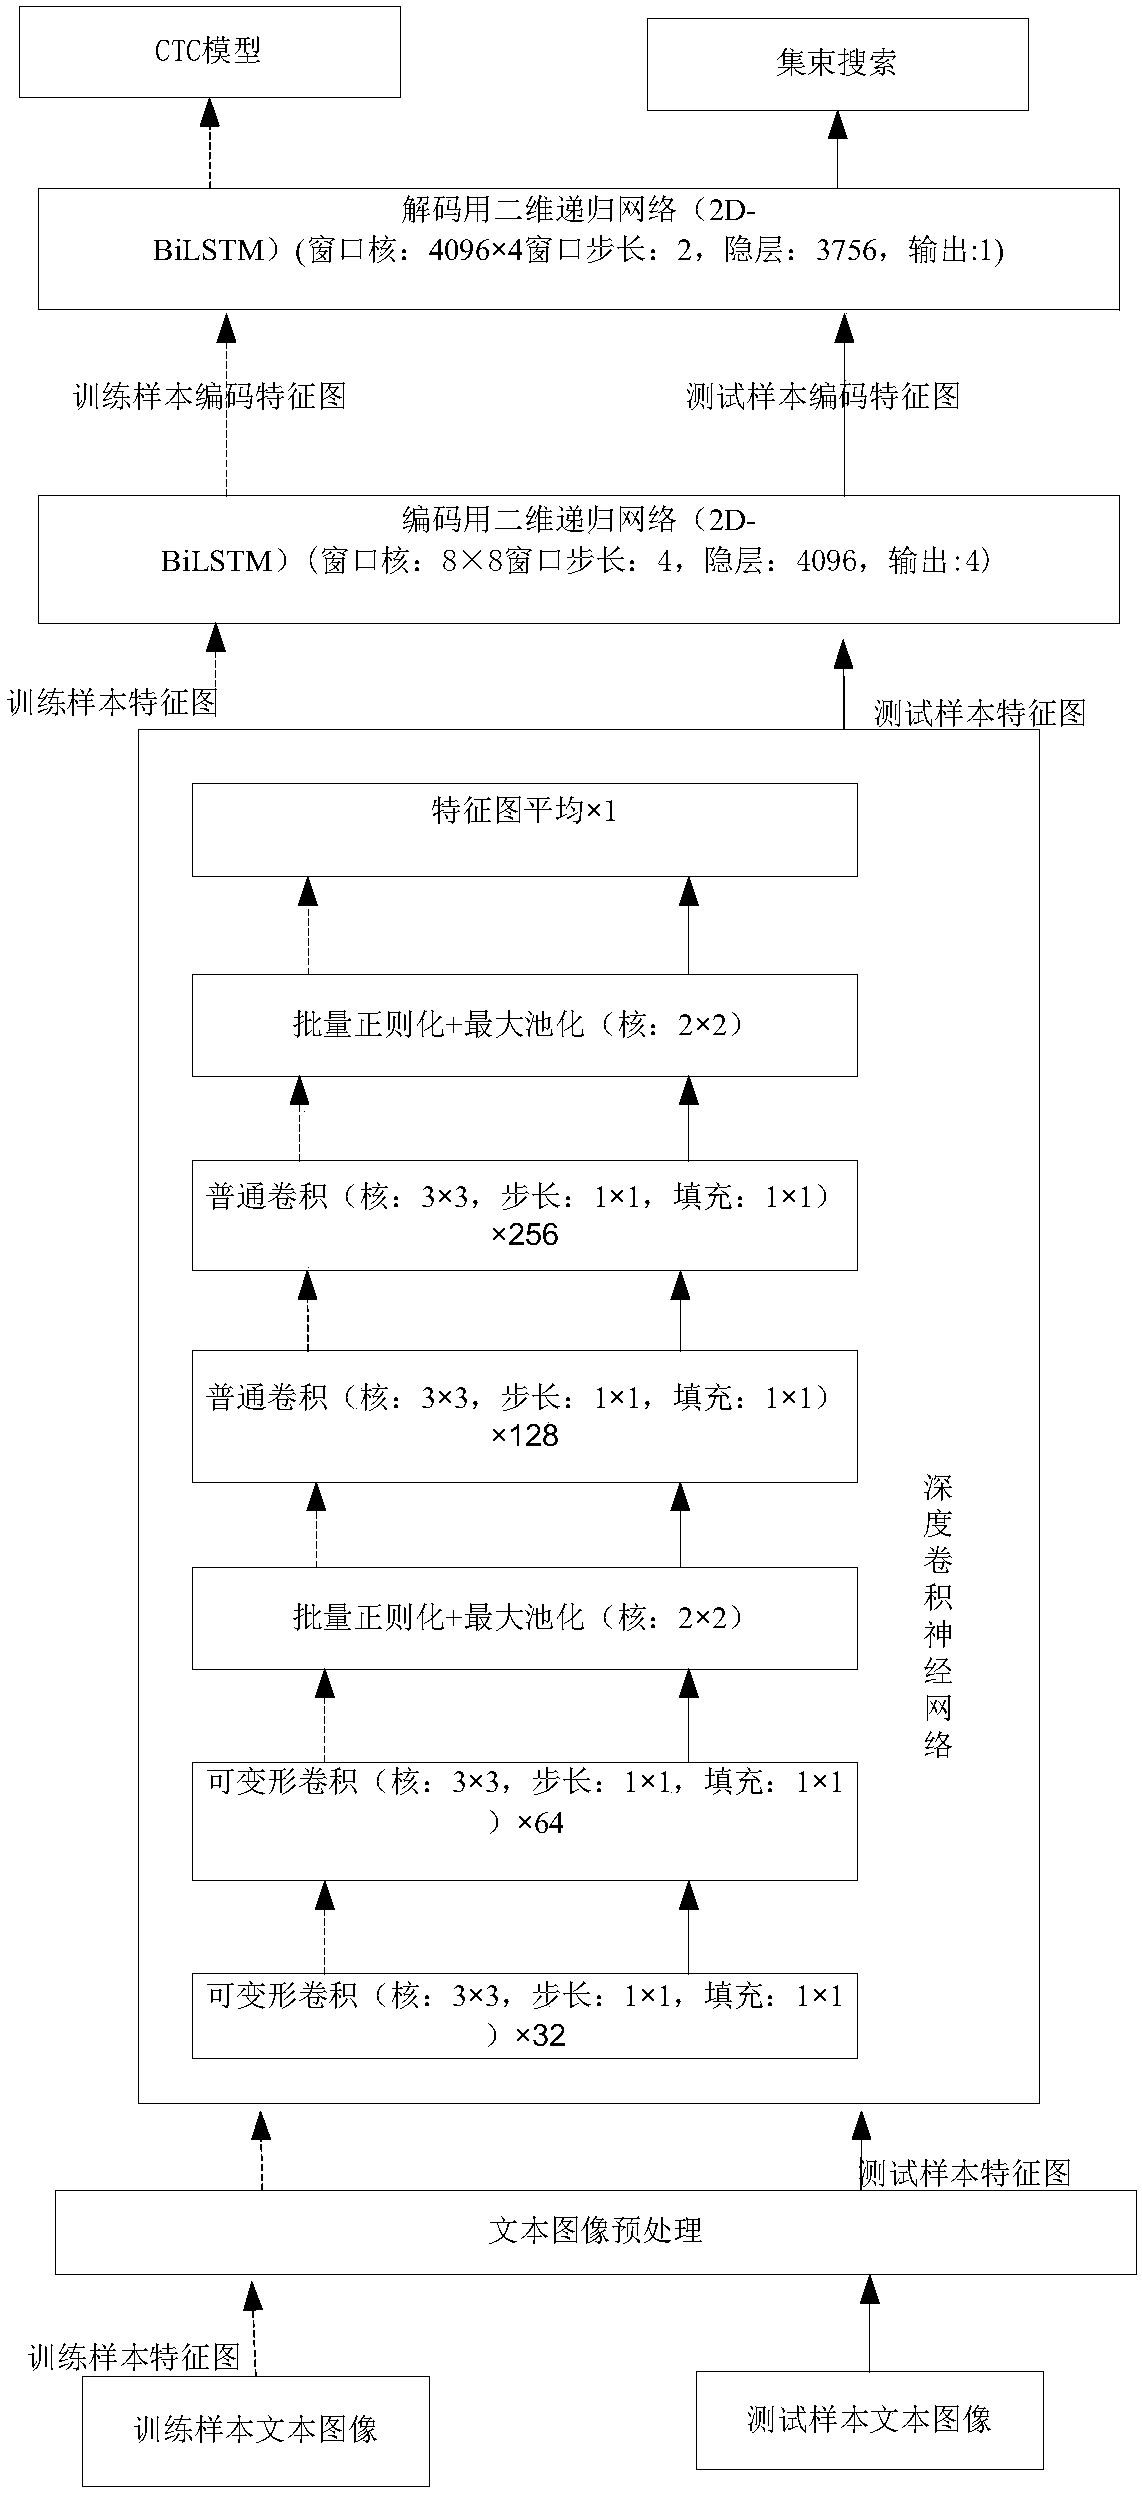 Two-dimensional recursive network-based recognition method of Chinese text in natural scene images